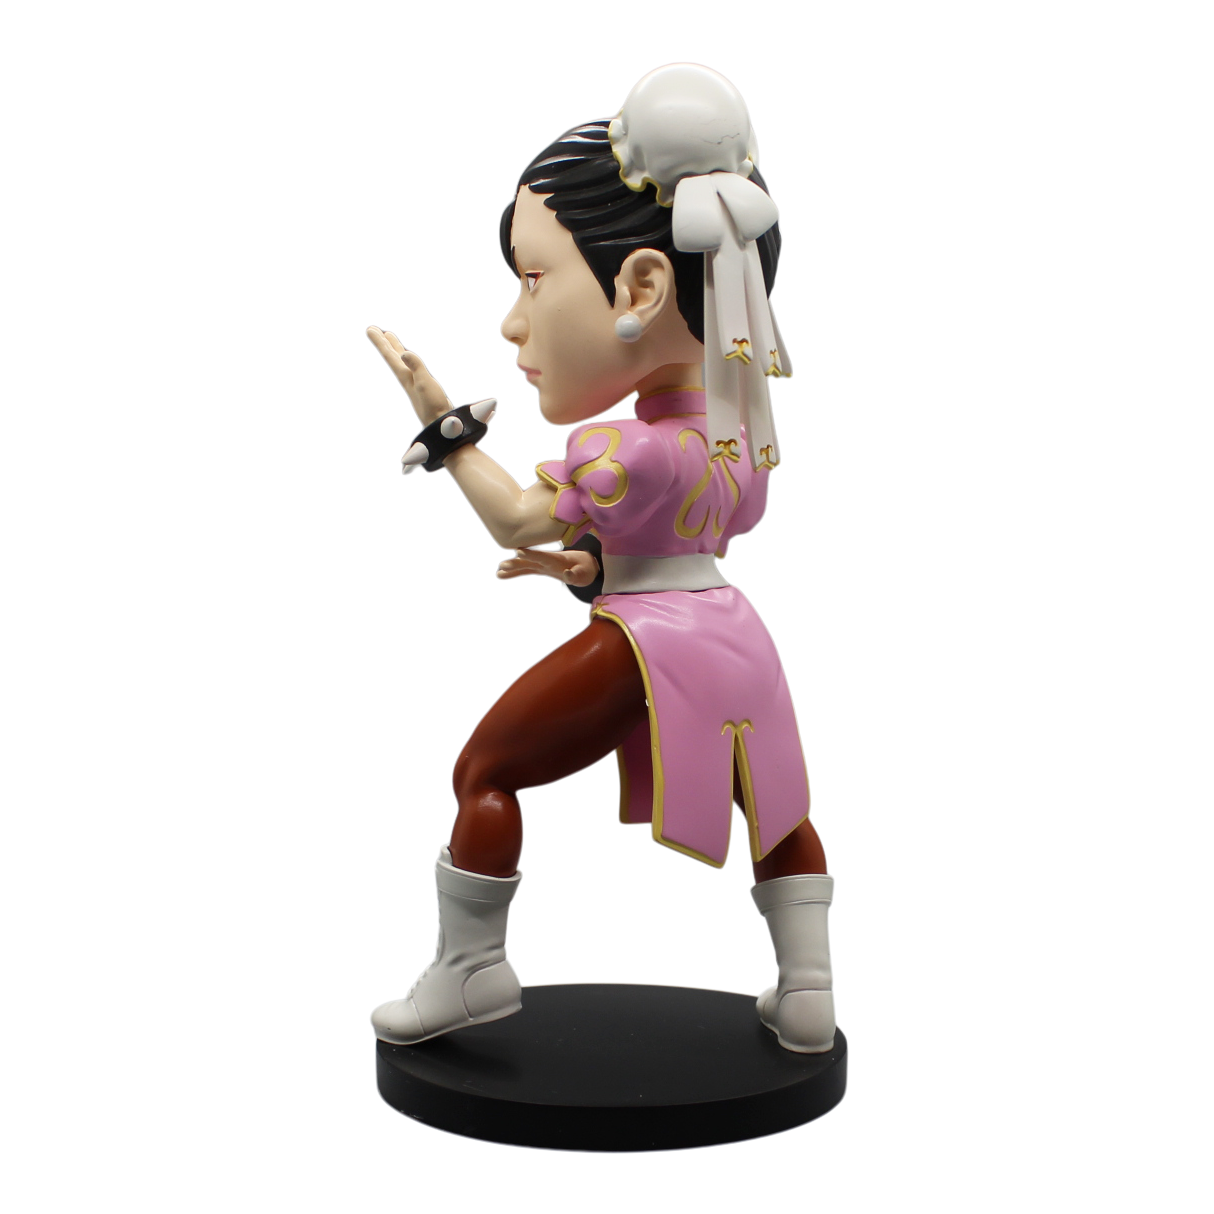 Street Fighter Chun-Li Pink Outfit Polystone Bobblehead (SDCC Exclusive) - Available 3rd Quarter 2021 - Icon Heroes 